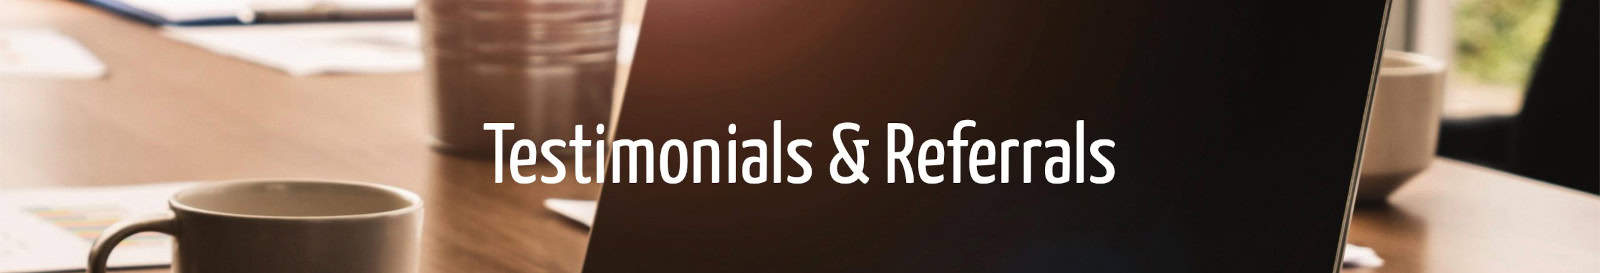 The Renfrow Group, Testimonials and Referrals